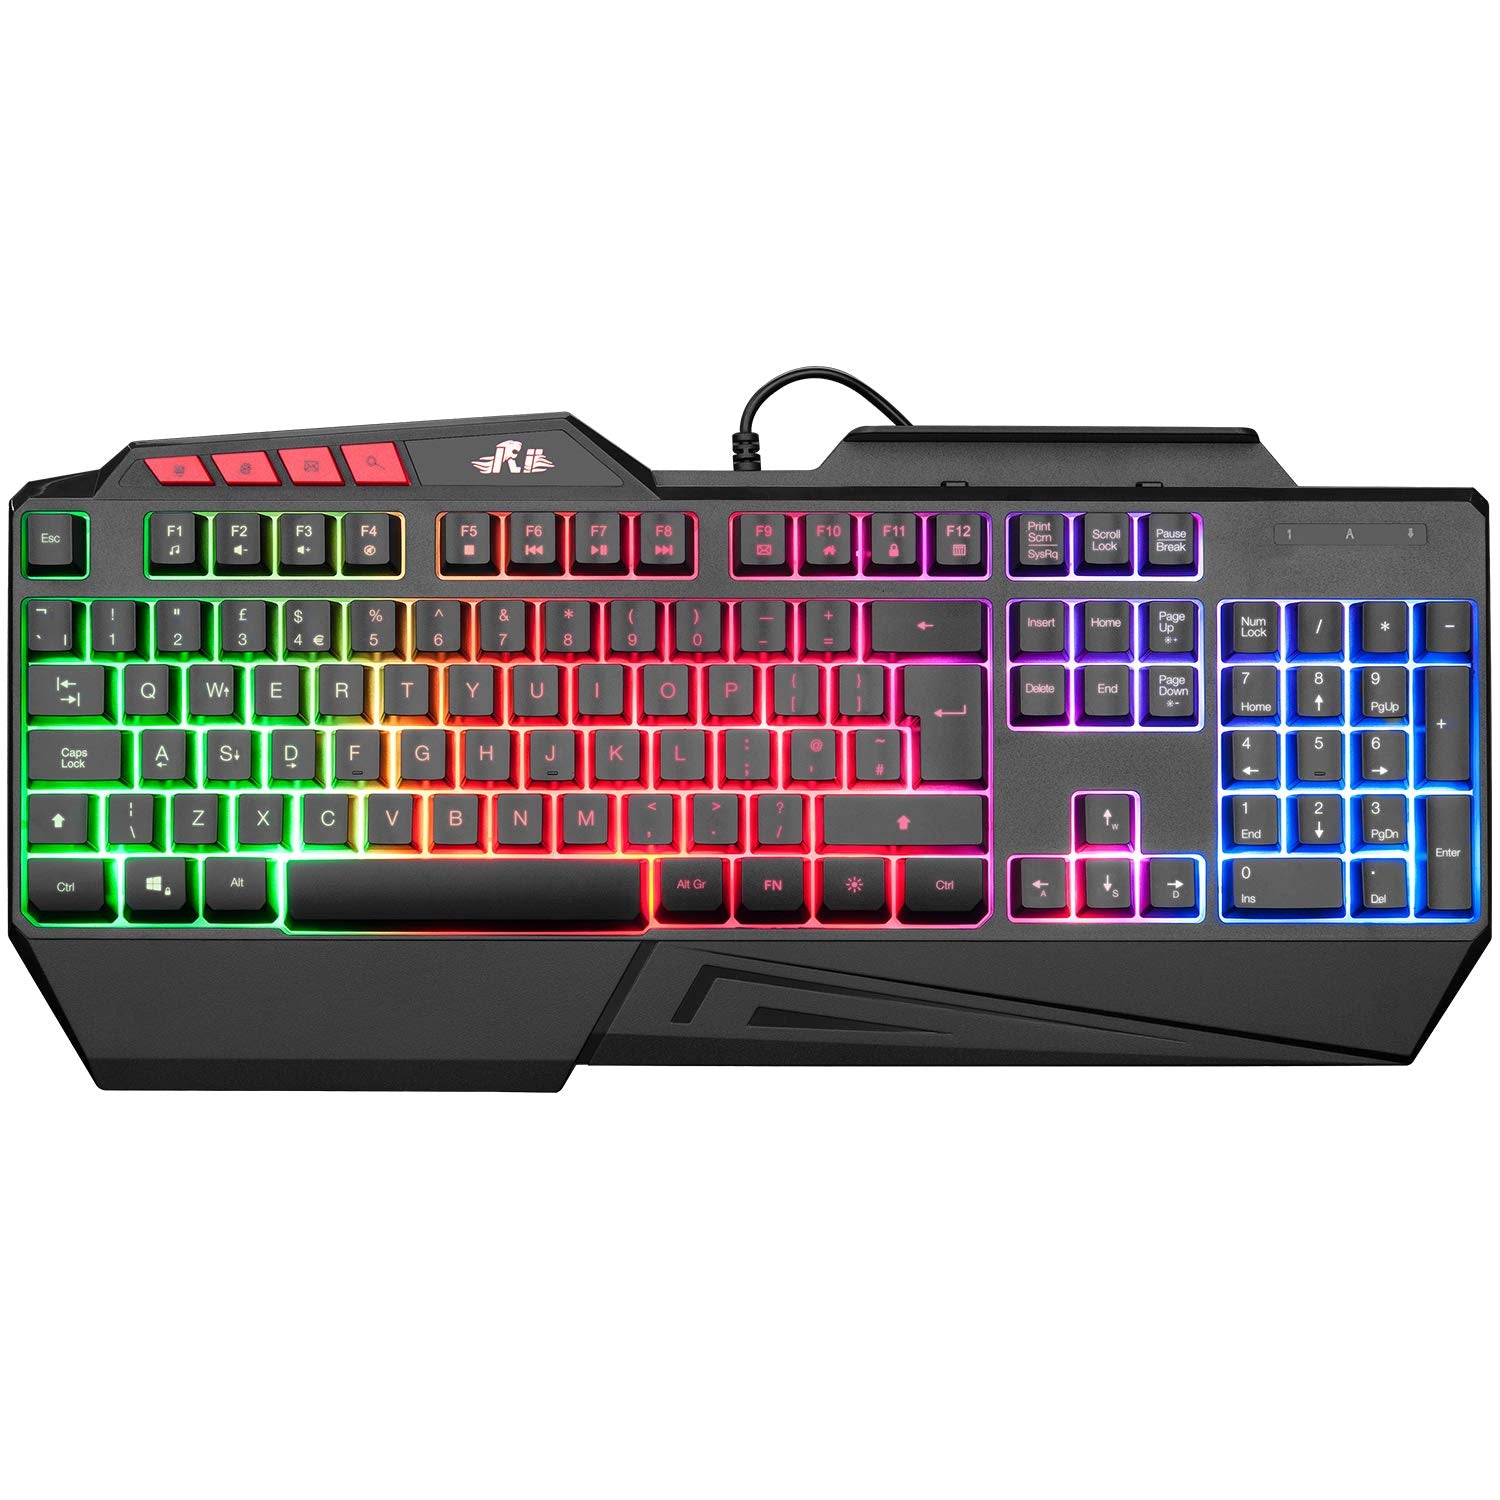 Rii RK202 Gaming Keyboard,LED Rainbow Backlit Light up Keyboard With Membrane Keys,Spill-Resistant,for PC Computer,Laptop,Windows,Gamer,Xbox one,PS4,PS5-UK Layout